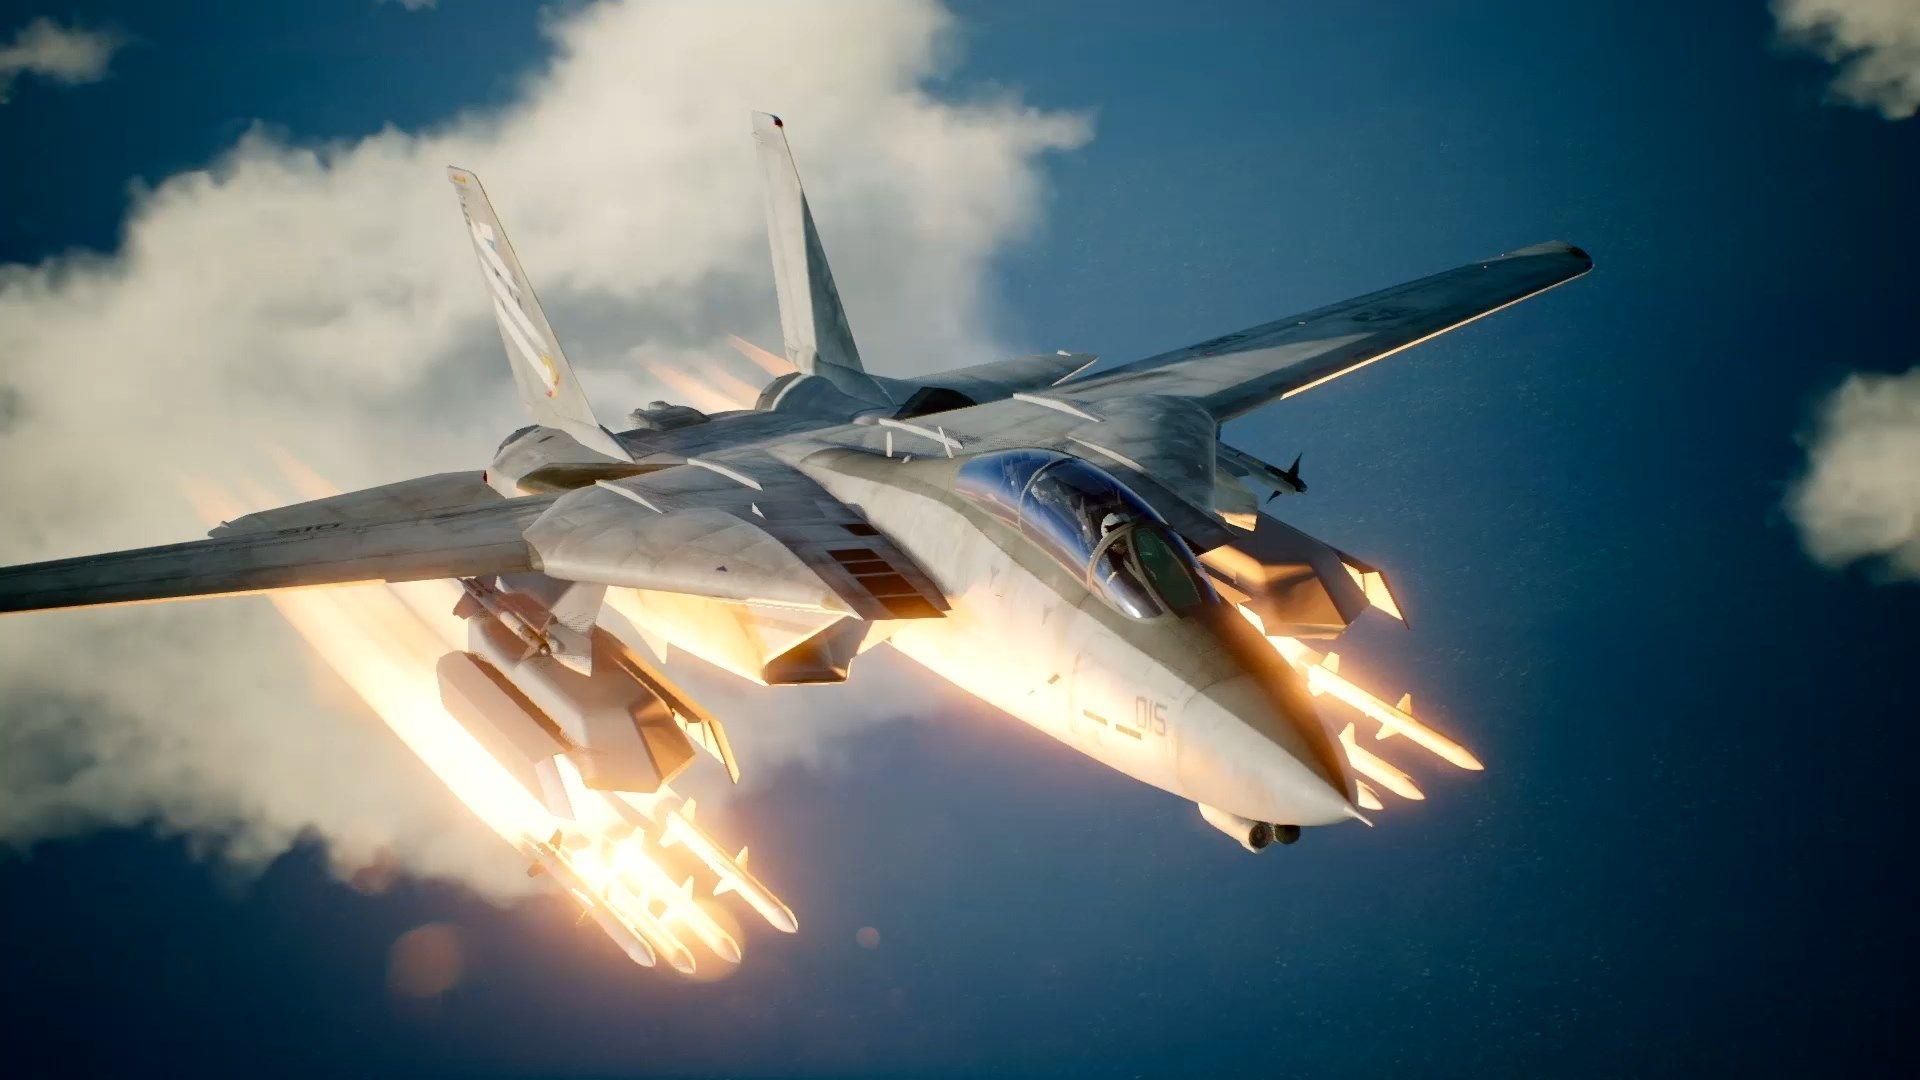 ace combat 7 wallpapers top free ace combat 7 backgrounds wallpaperaccess ace combat 7 wallpapers top free ace